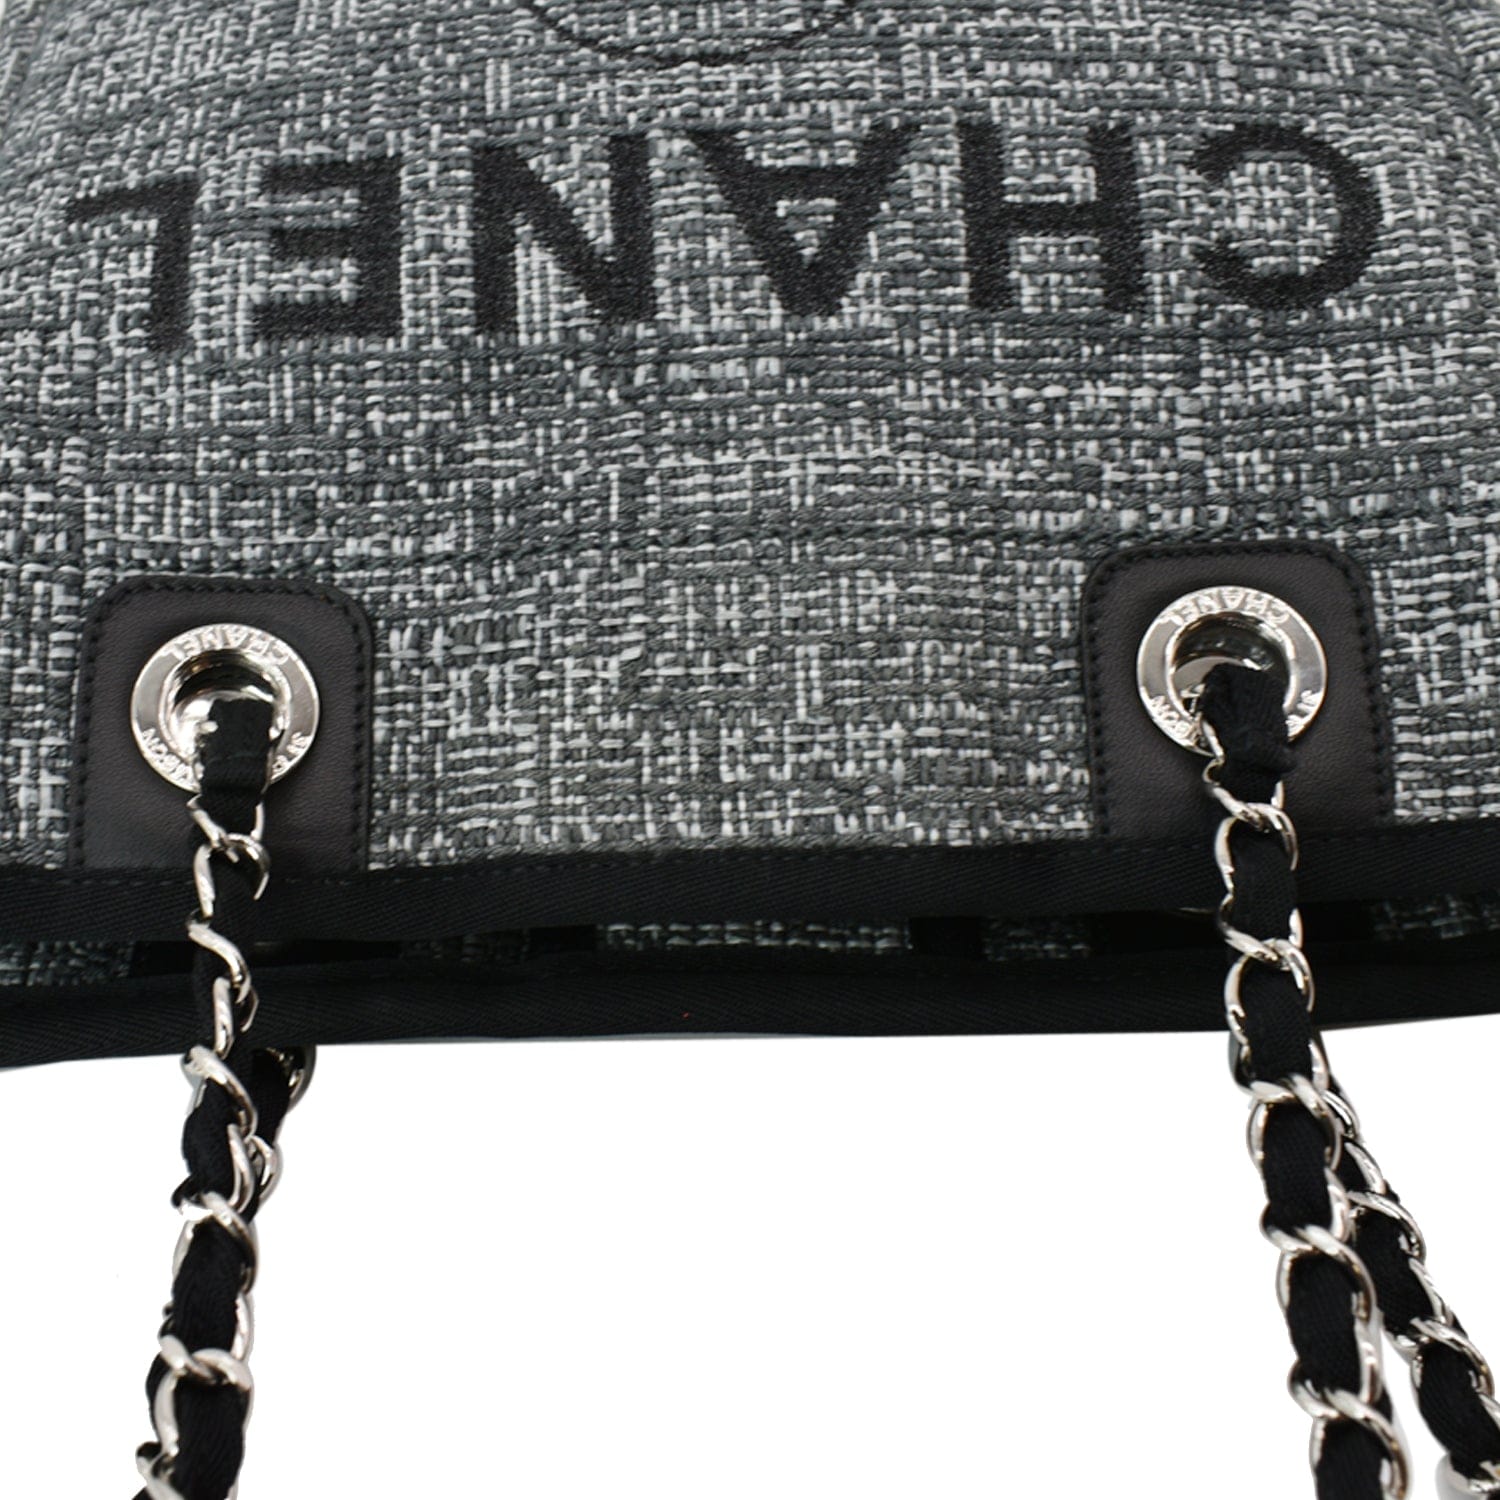 CHANEL, Bags, Chanel Medium Deauville Tote In Gray Tweed